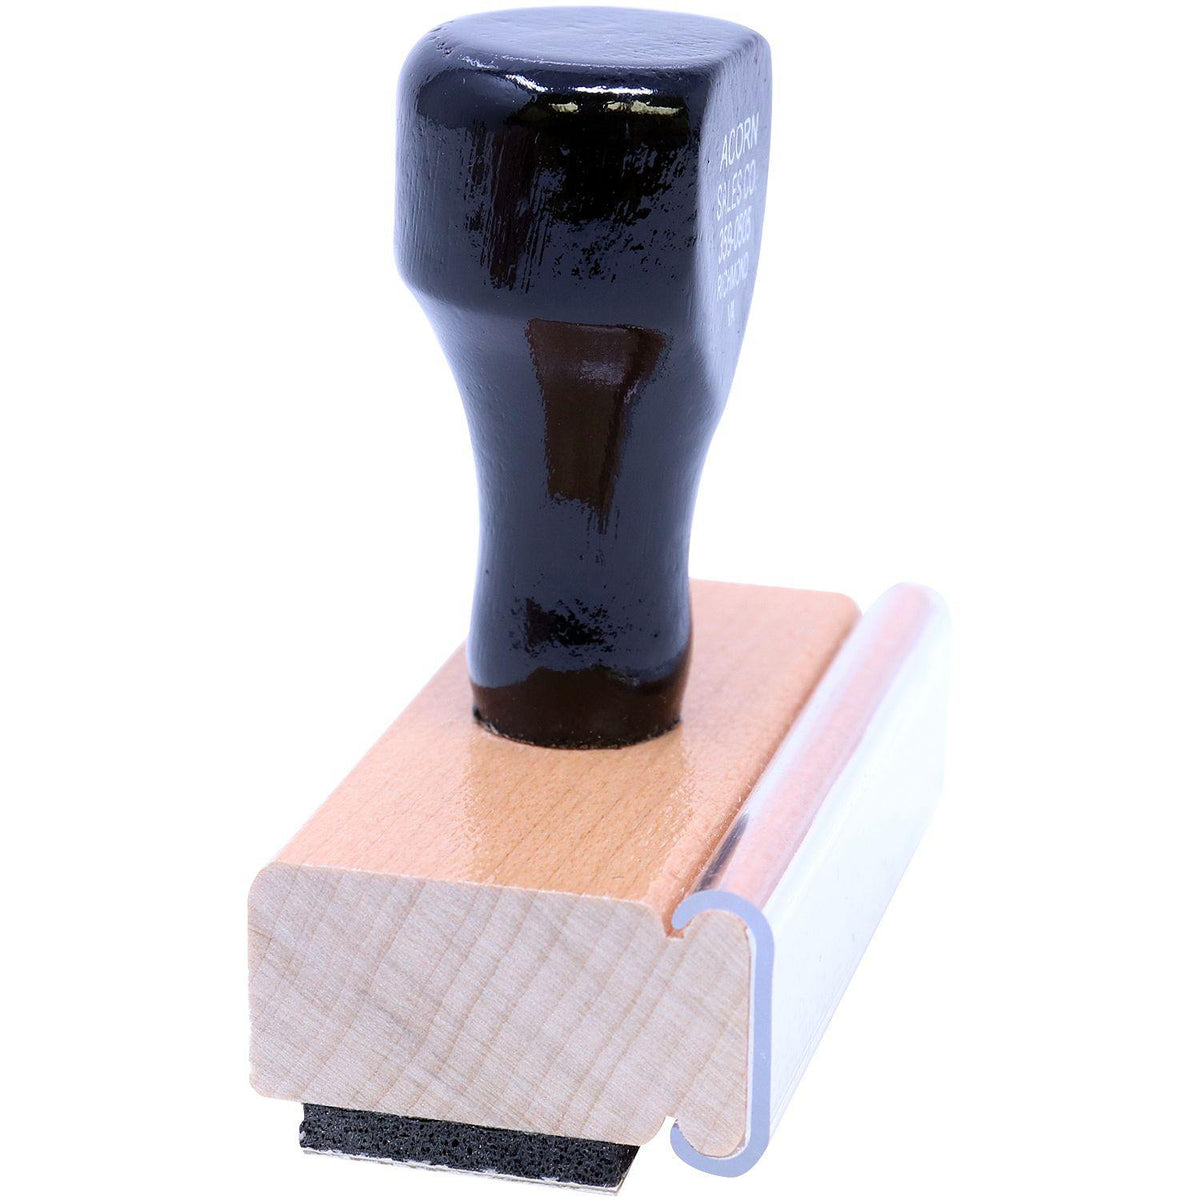 Side View of Large Correo Aero Rubber Stamp at an Angle